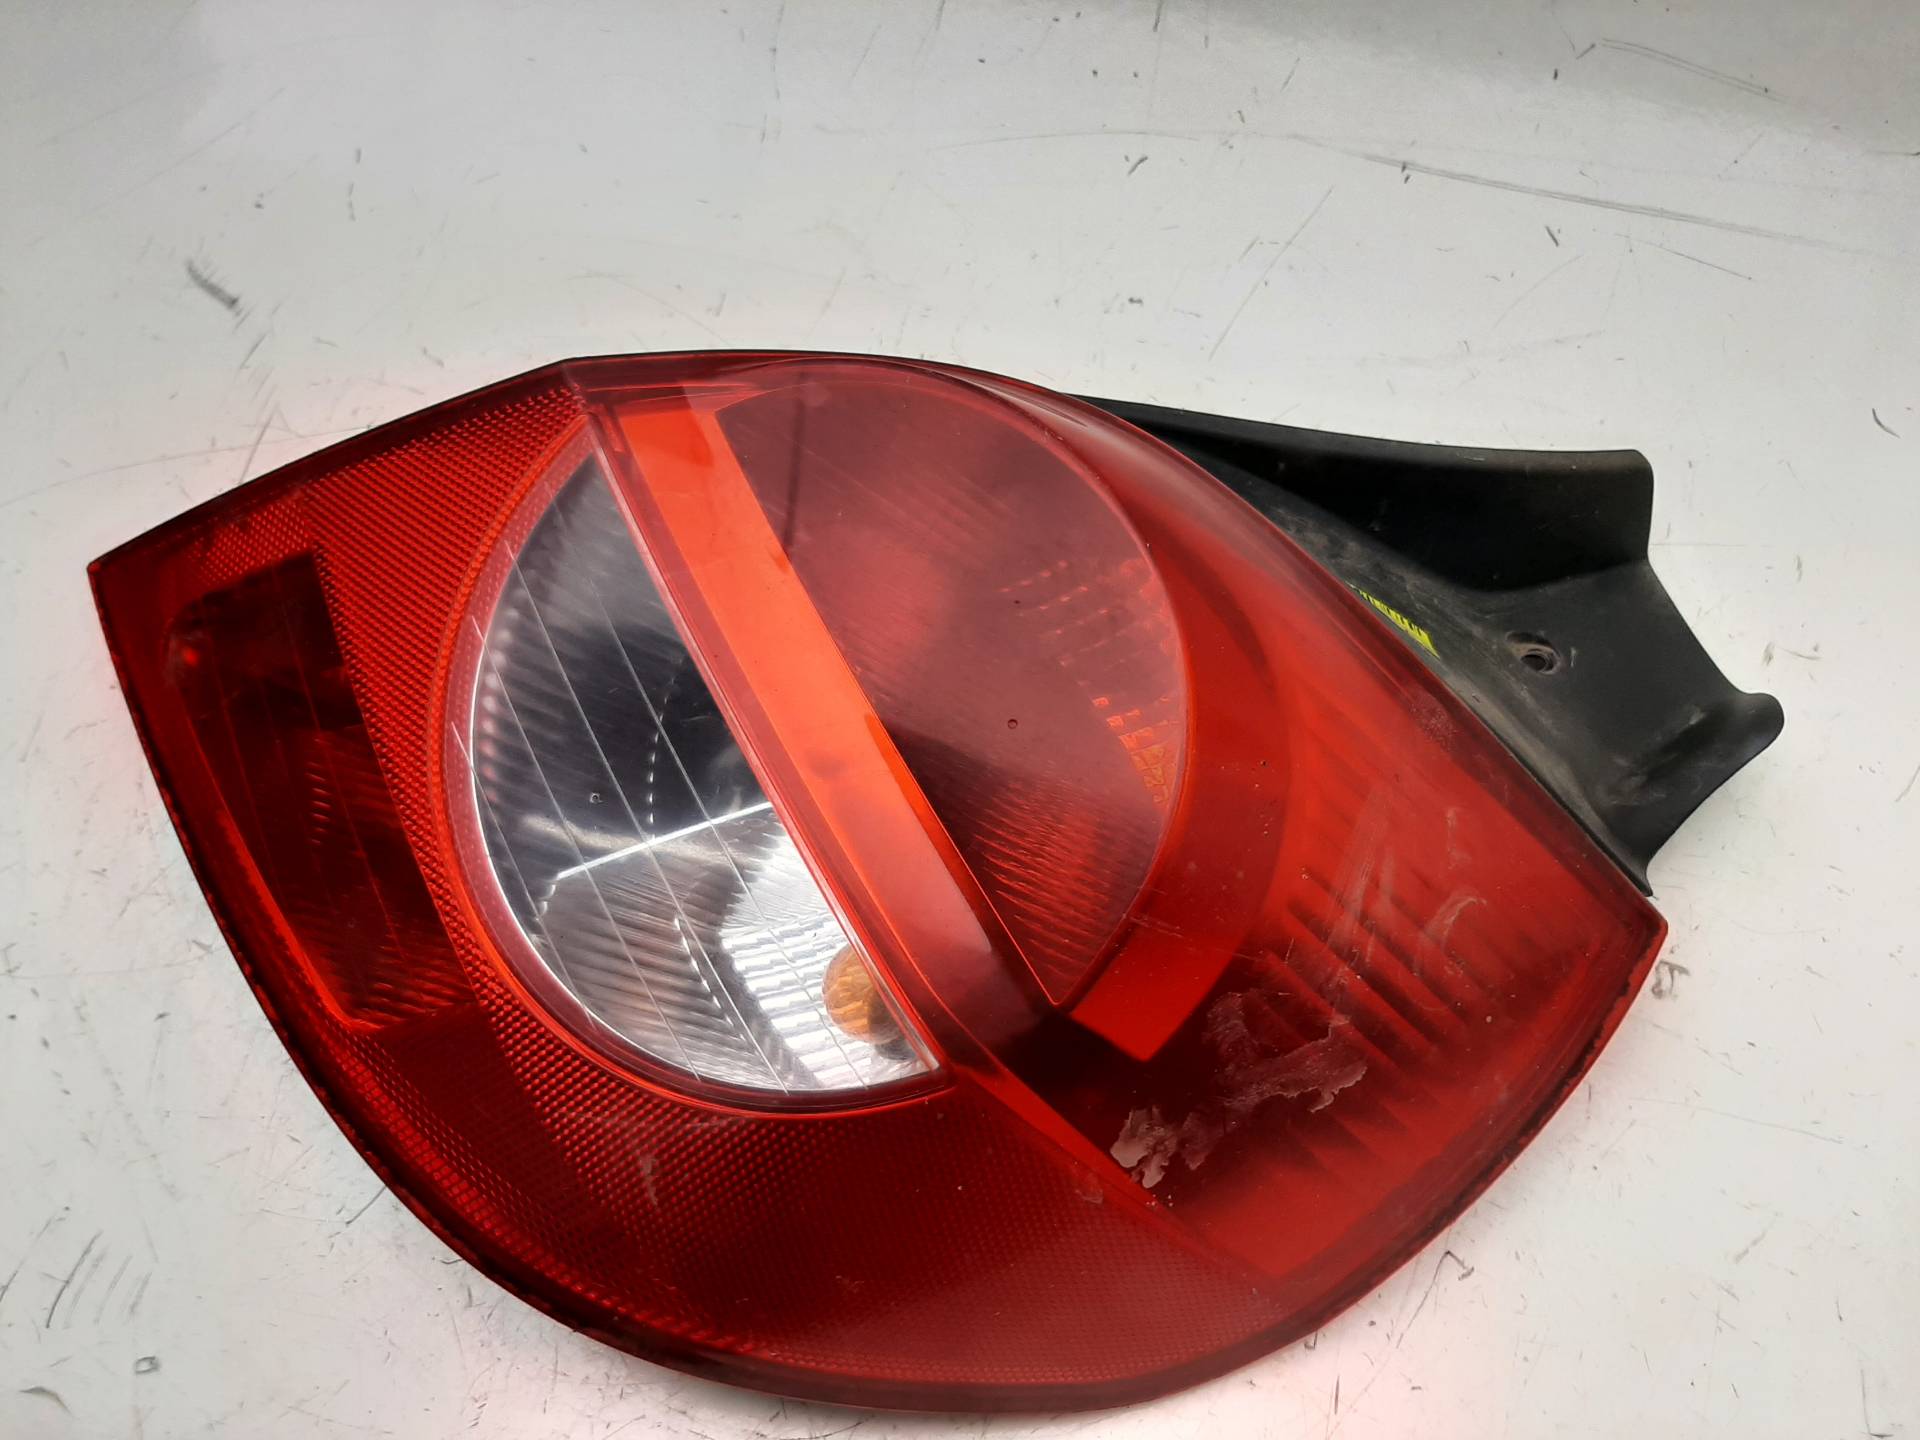 RENAULT Clio 3 generation (2005-2012) Rear Right Taillight Lamp 89035080 18578621